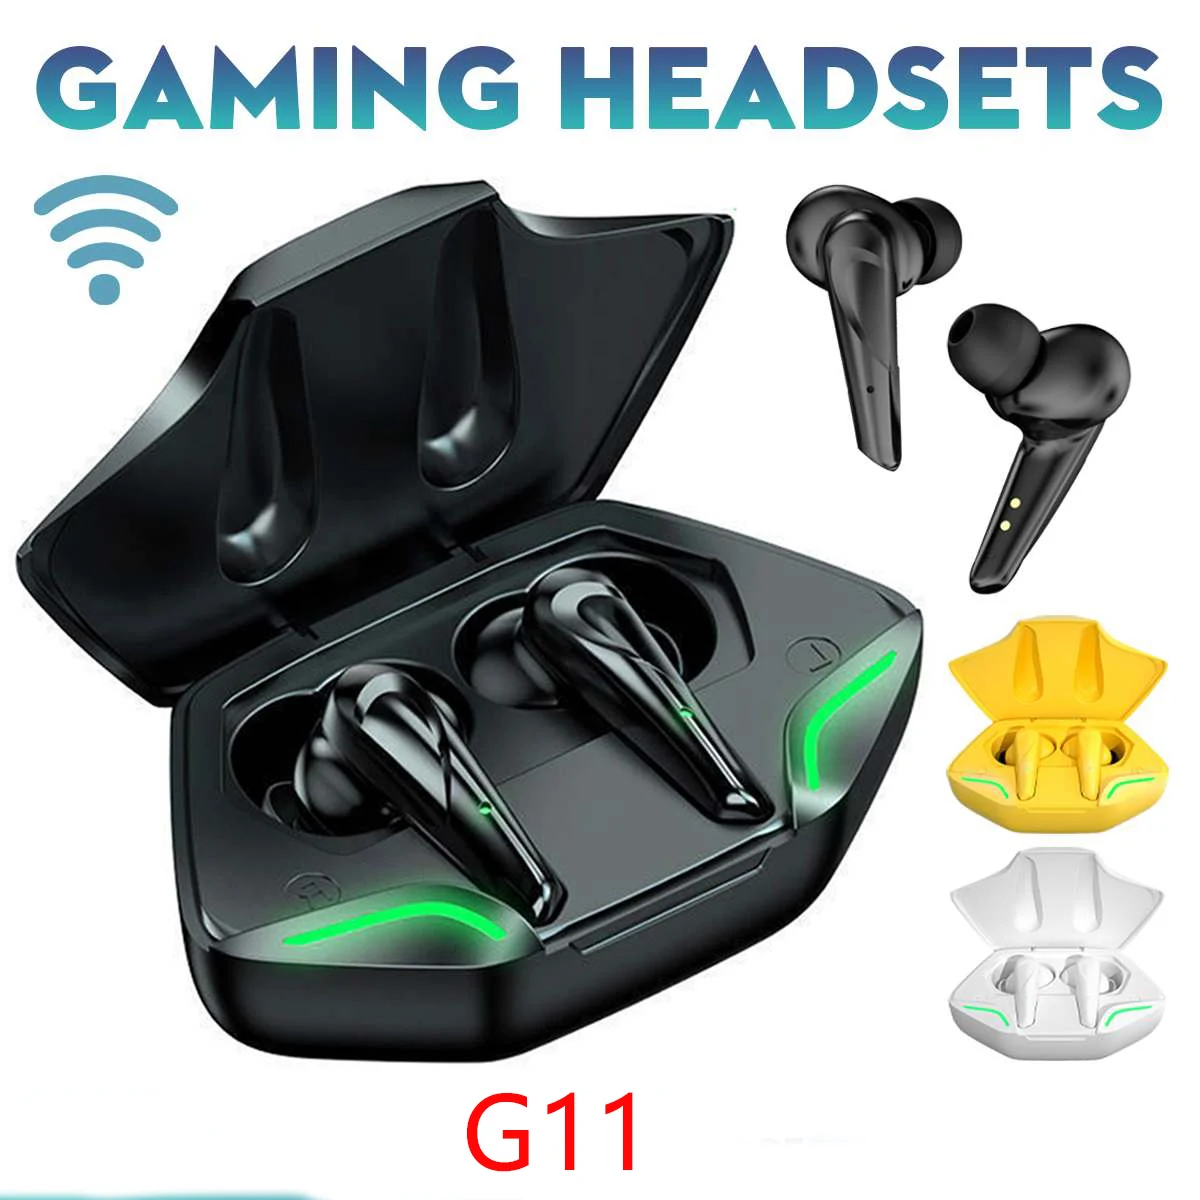 

X15 TWS G11 Gaming Earbuds Wireless earbuds Bluetooth Earphone With Mic Bass Audio Sound Positioning Stereo Music HiFi Headset